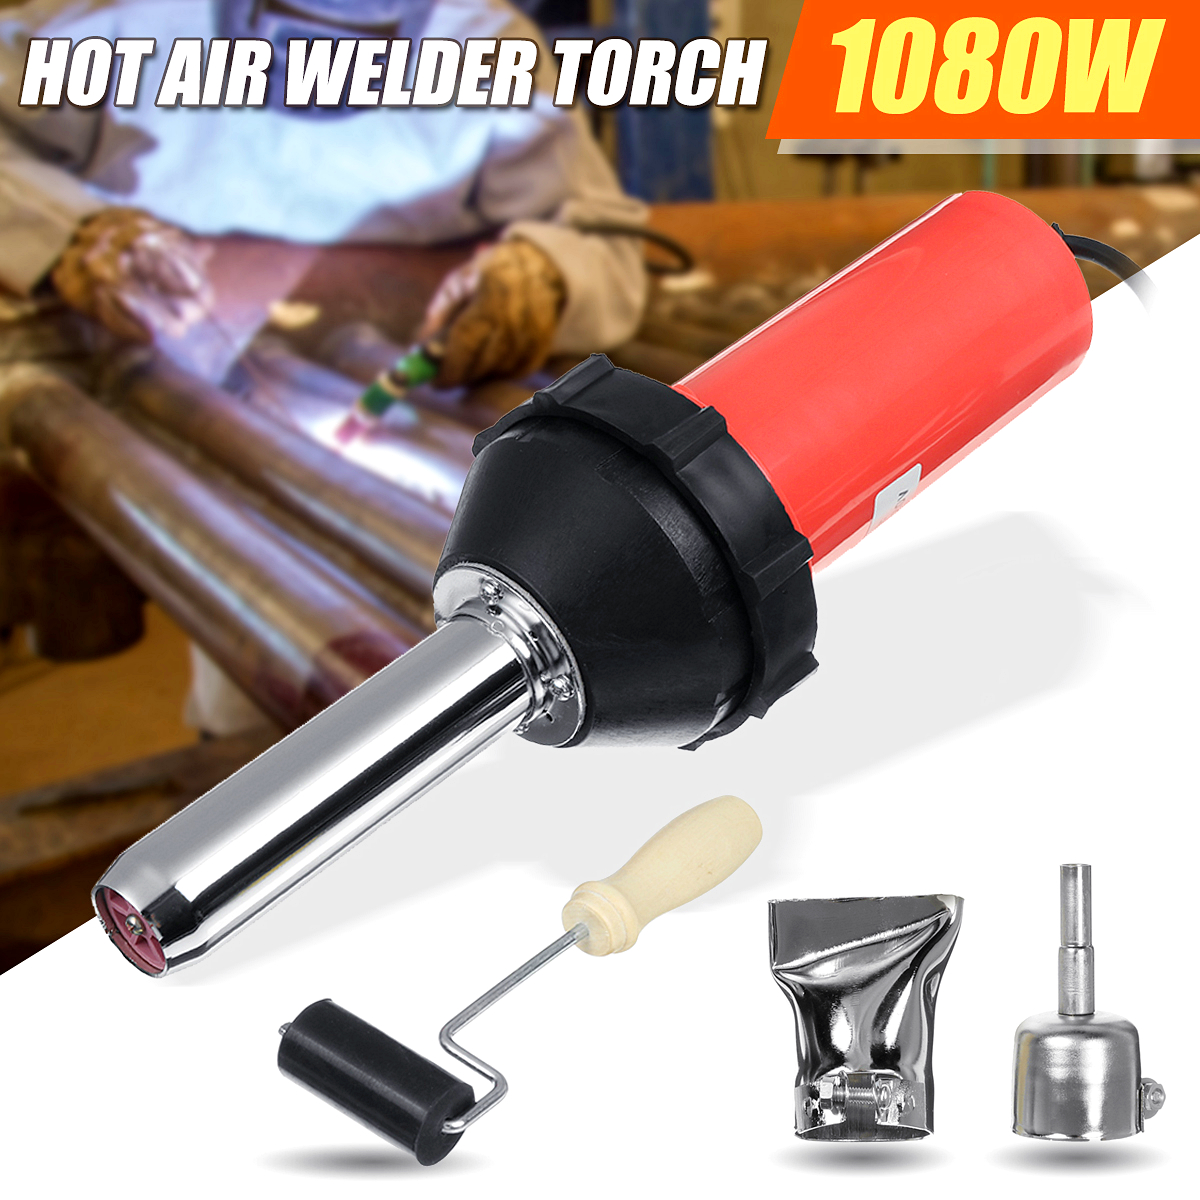 1080W-Plastic-Hot-Air-Welding-Tool-Welder-Torch-with-2Pcs-Nozzles--Roller--Adapter-1558534-1